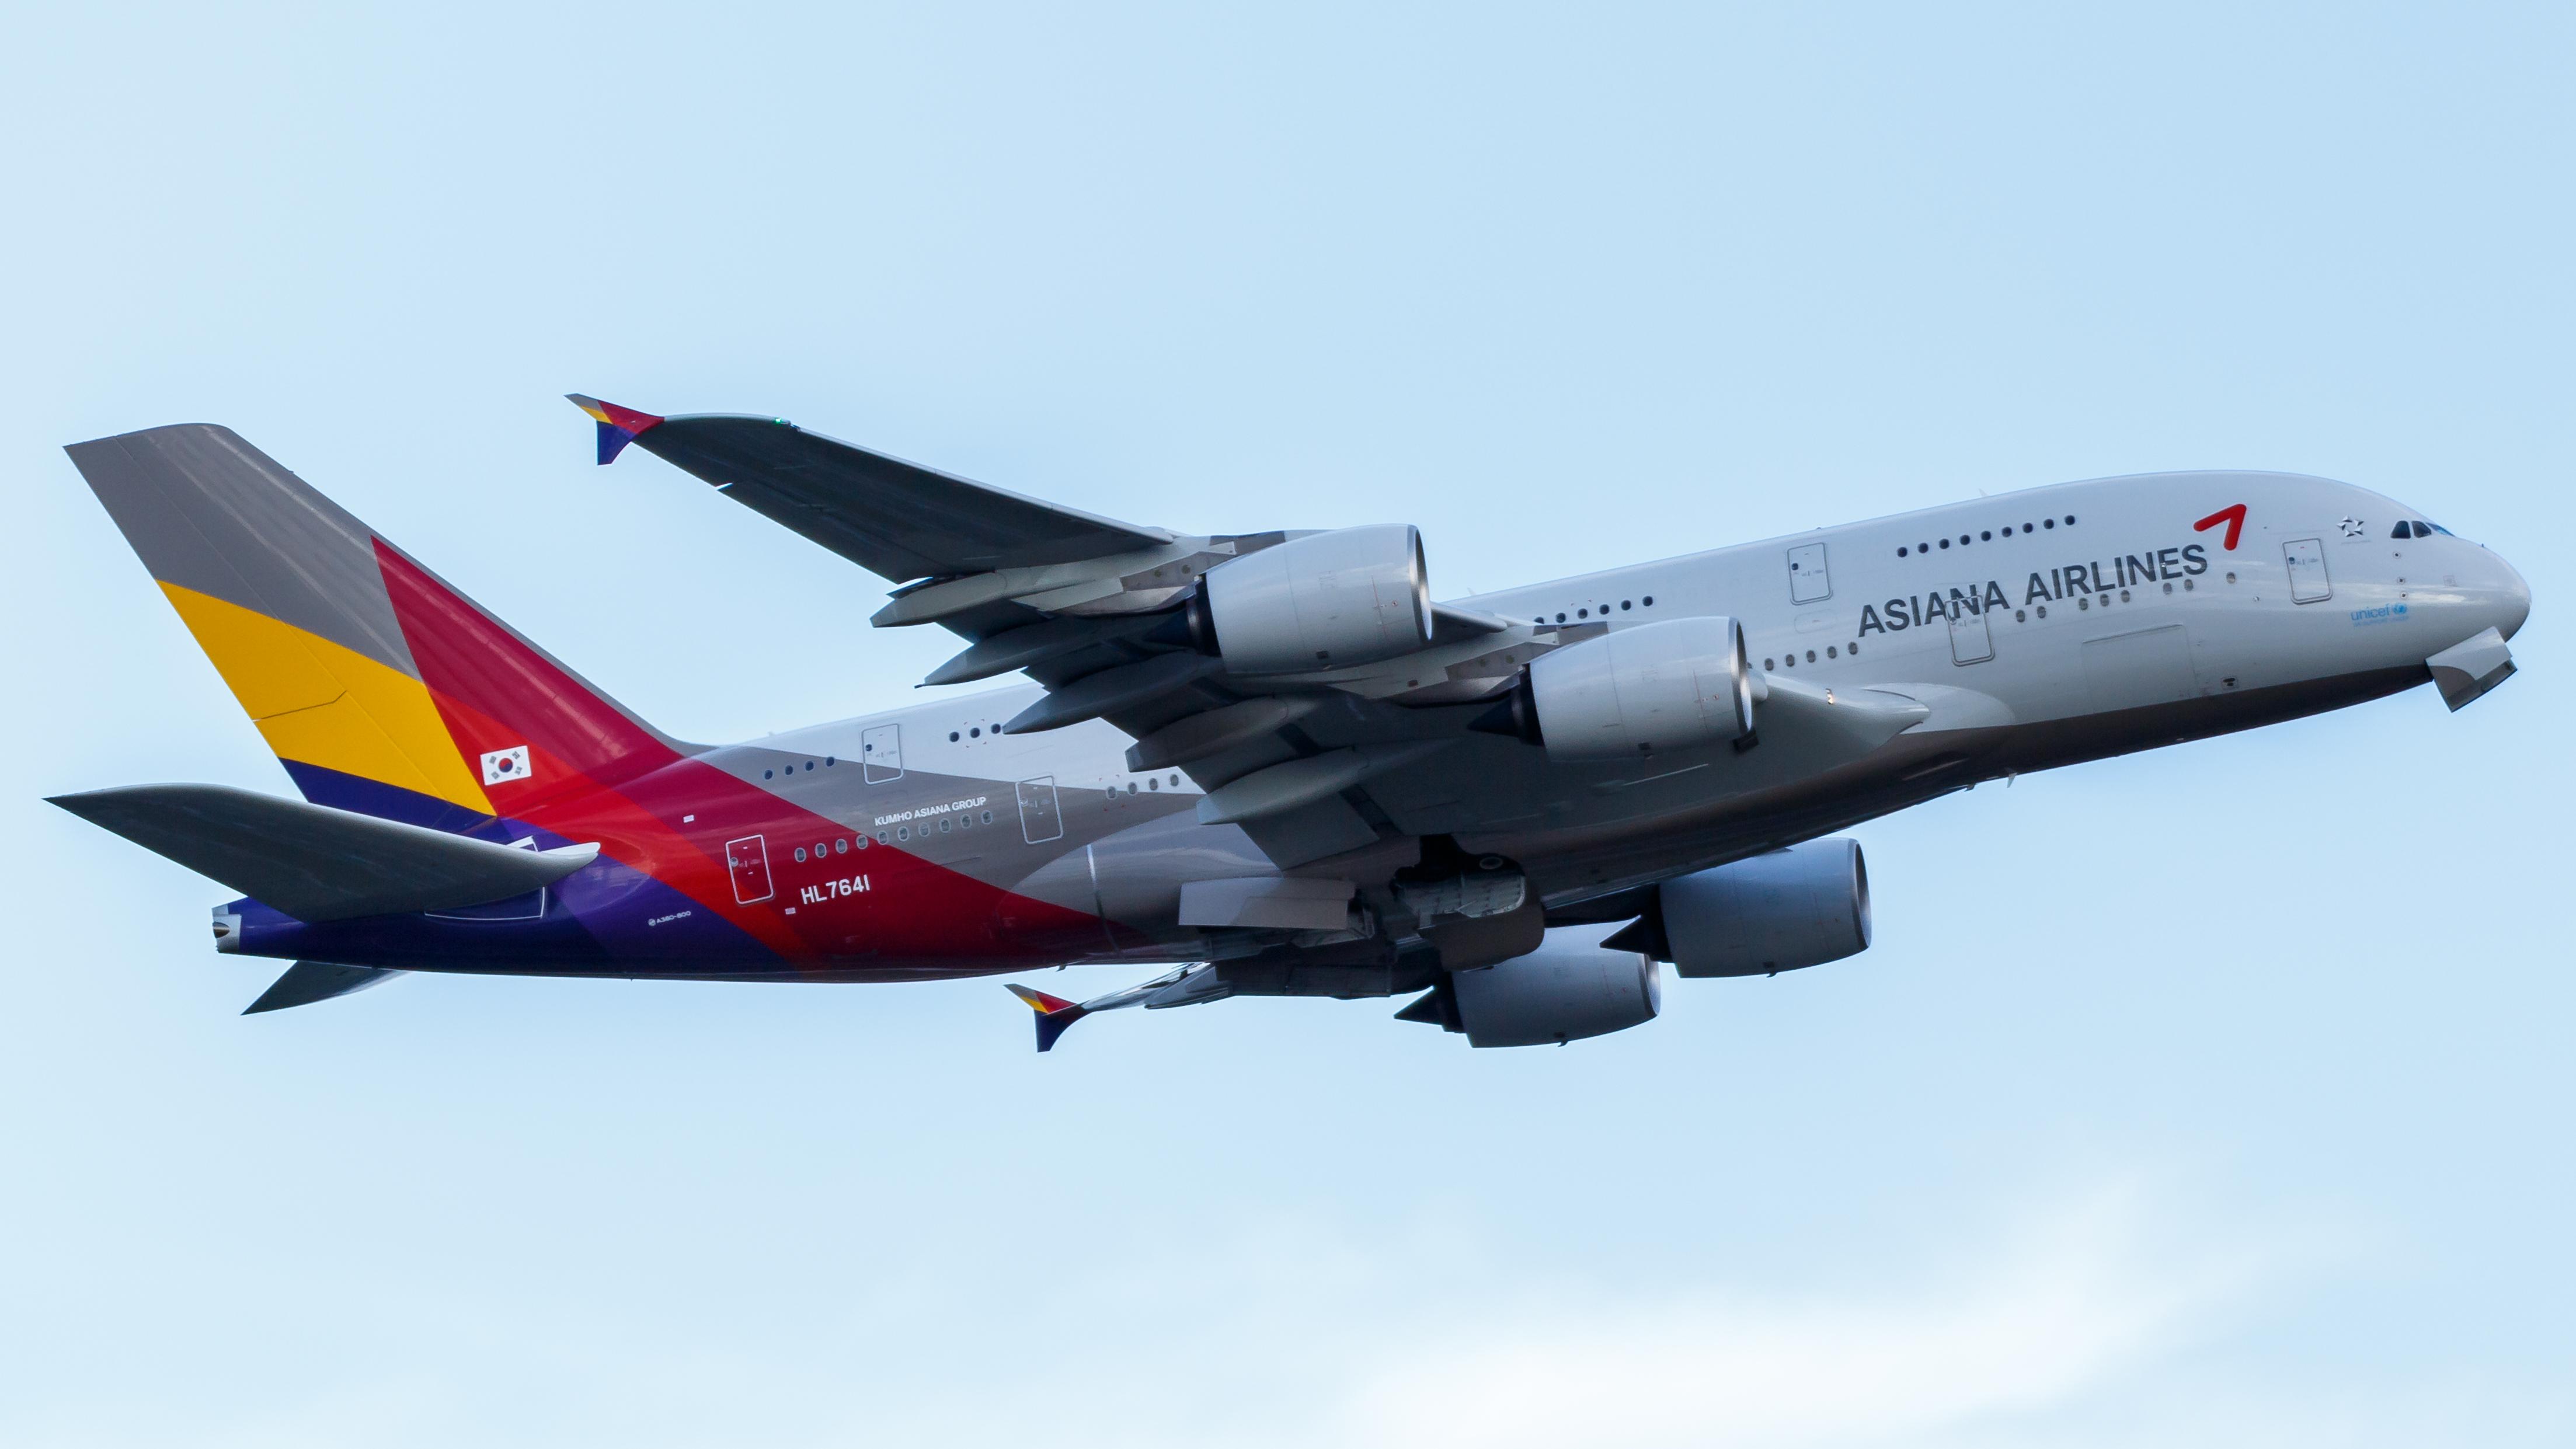 Asiana Airlines A380-800